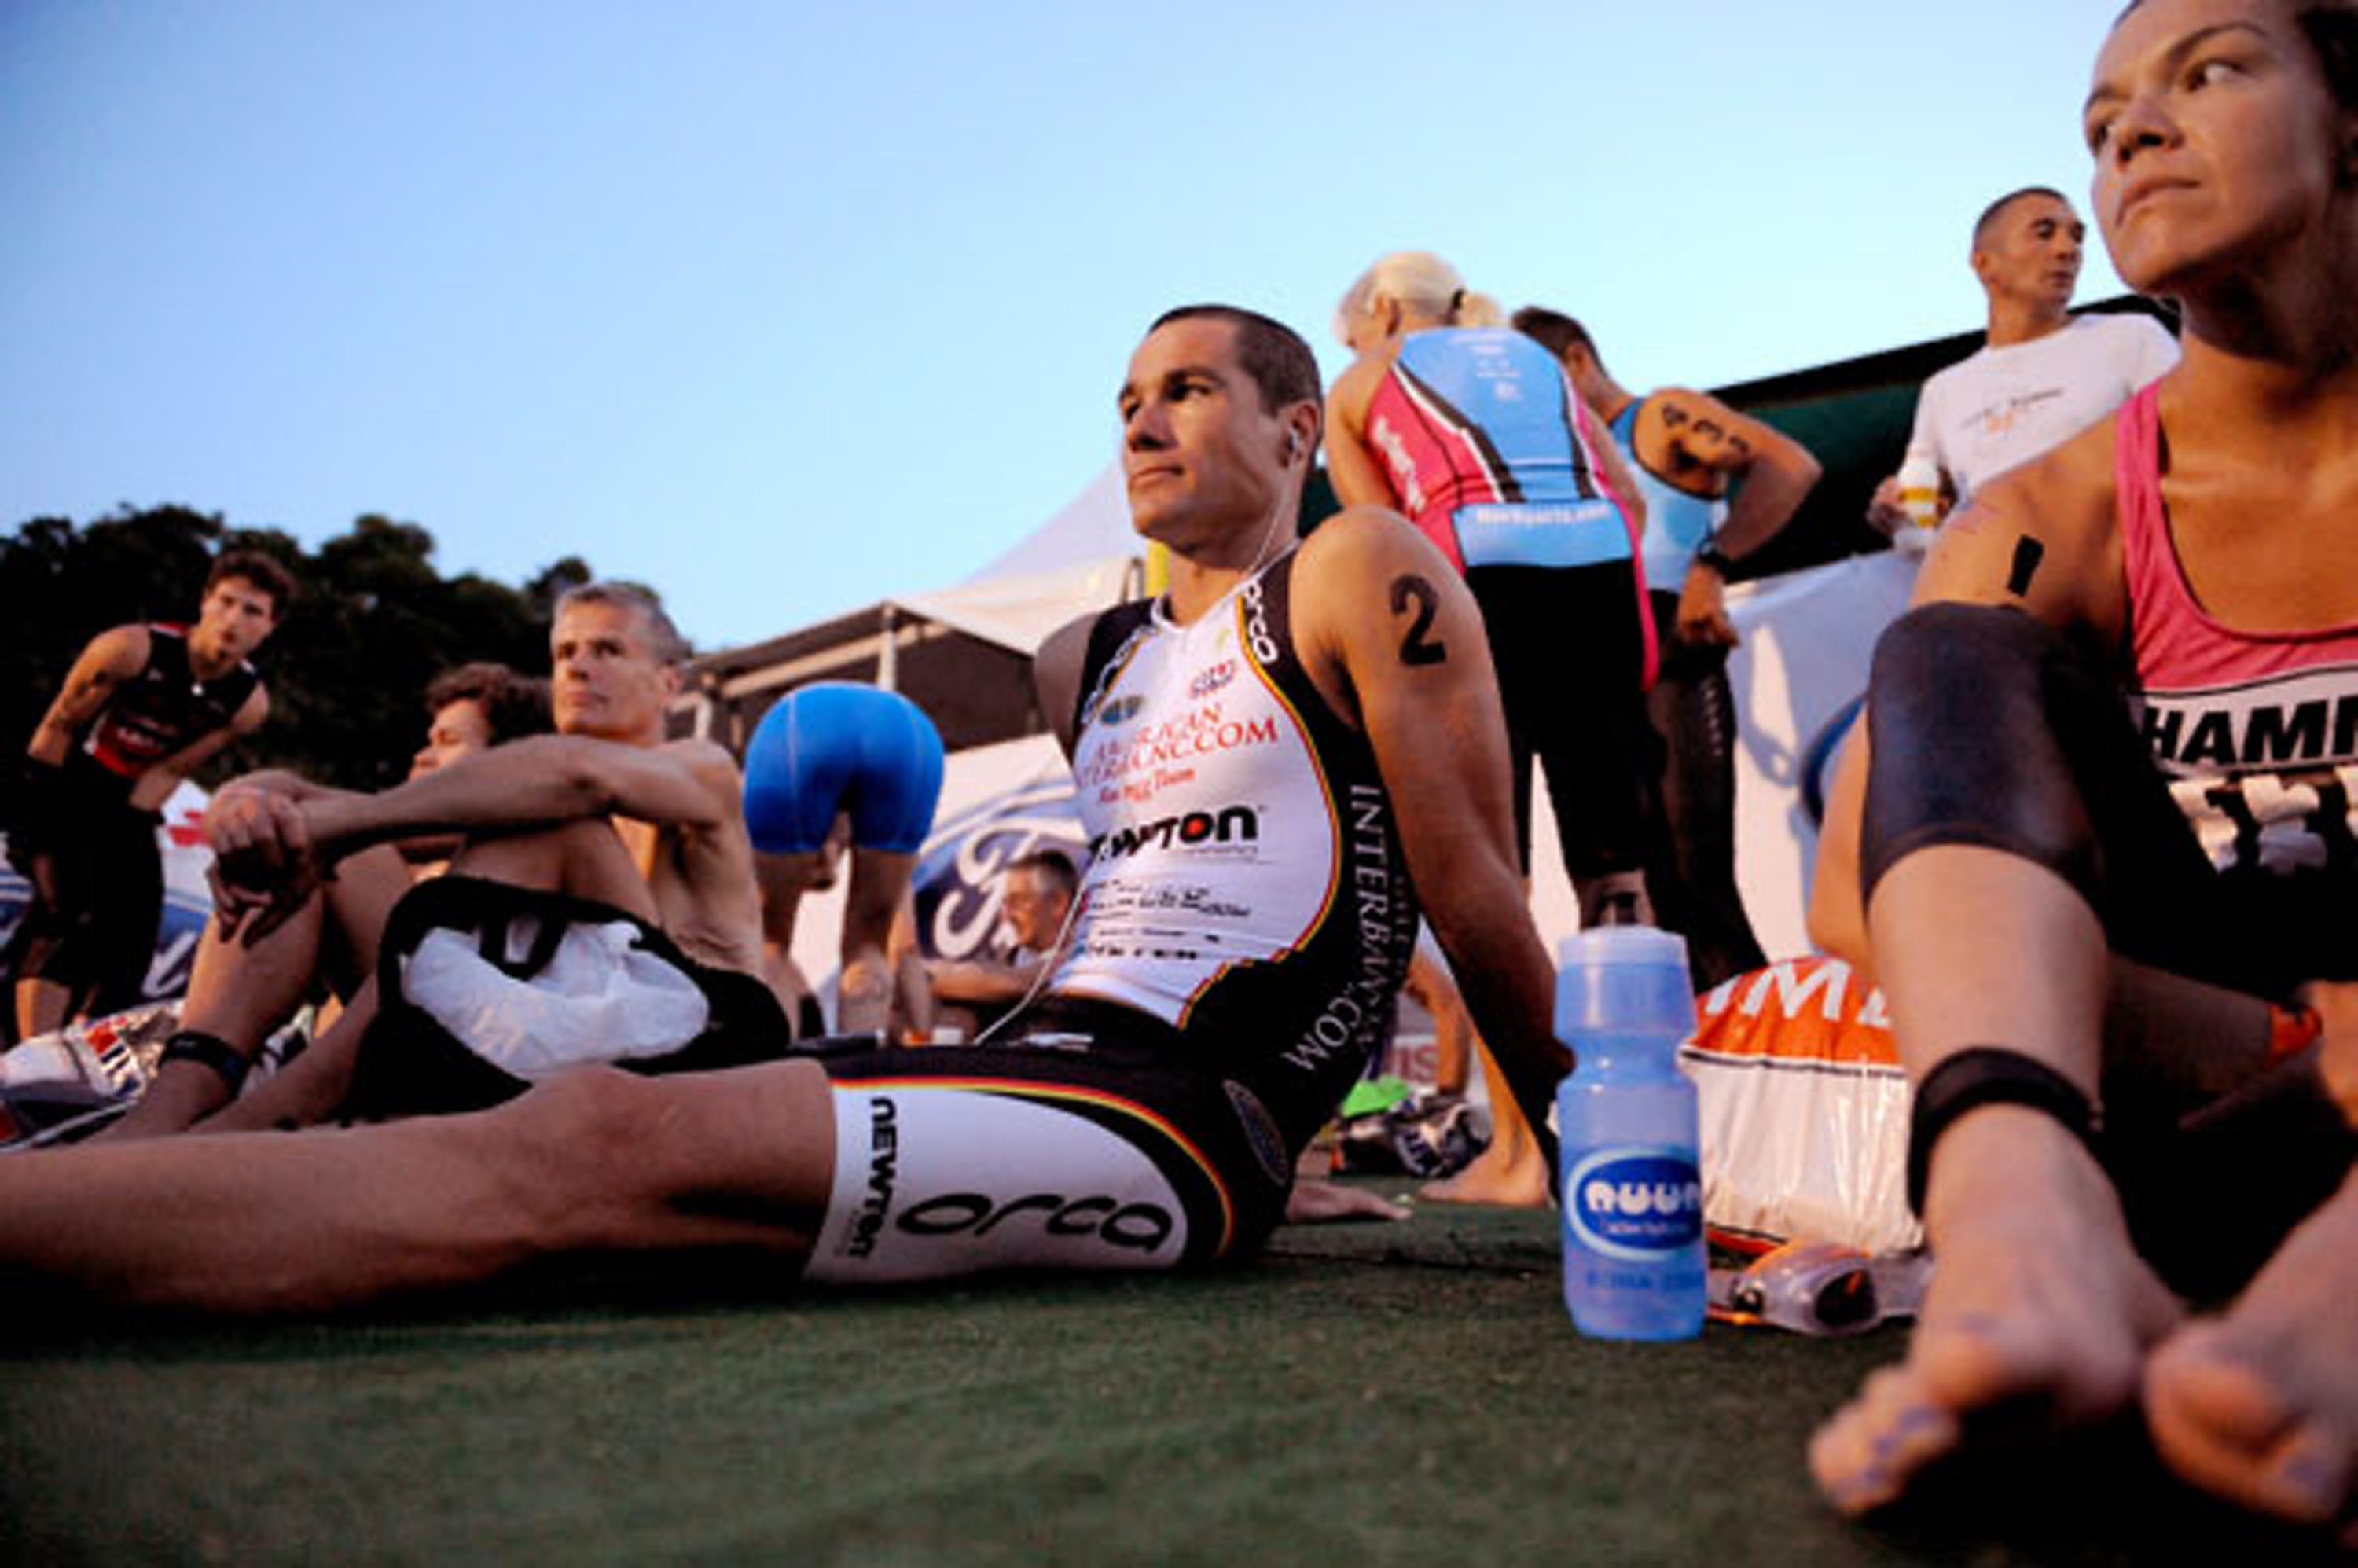 Crowie getting in the zone before a race